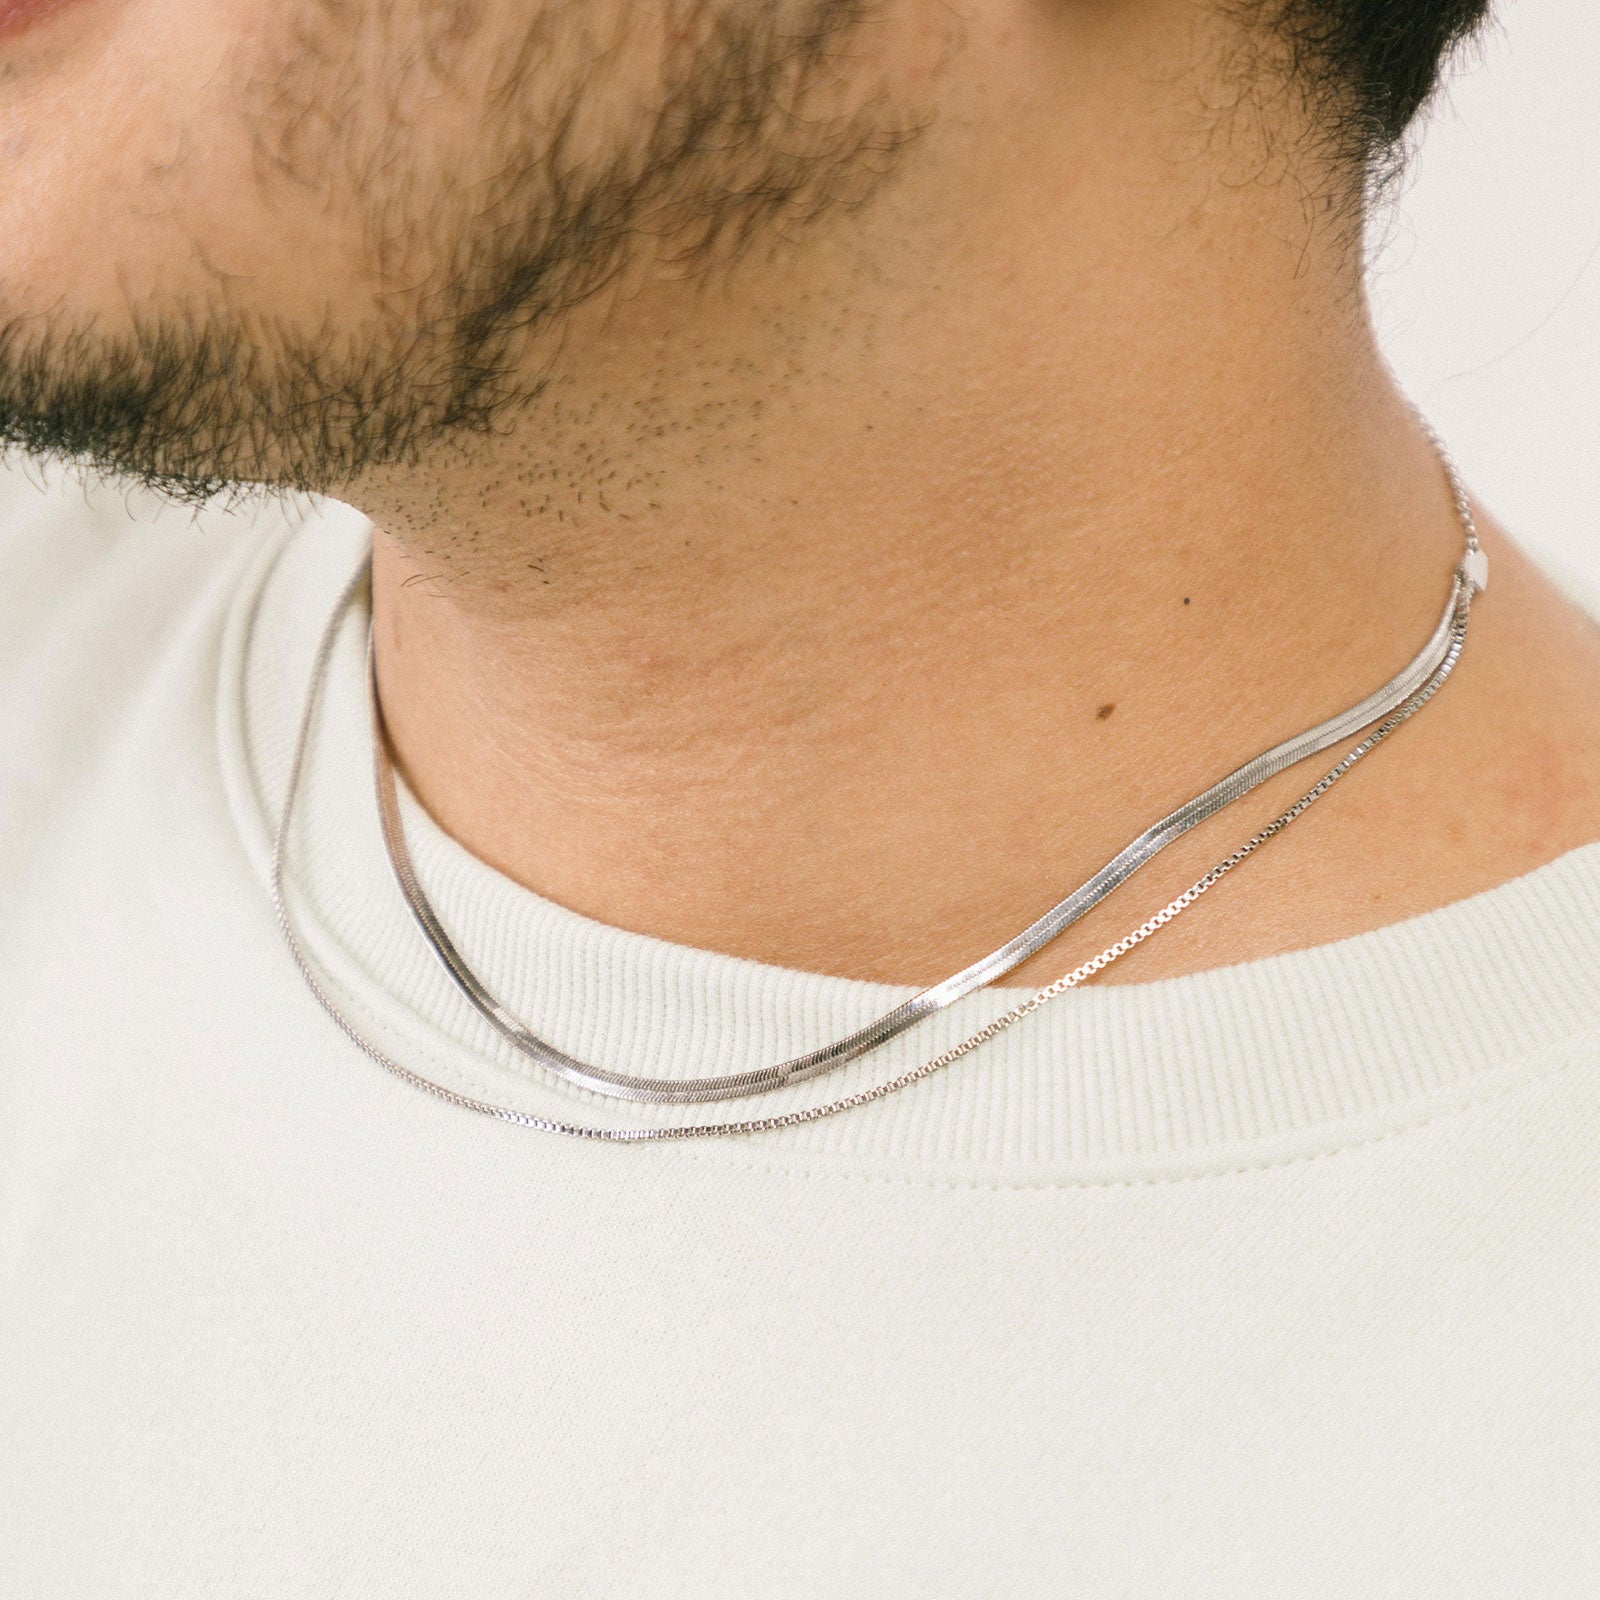 A model wearing the Double Layered Chain Necklace In Silver is adjustable, constructed of stainless steel and is waterproof and non-tarnish. It is also available in Gold.